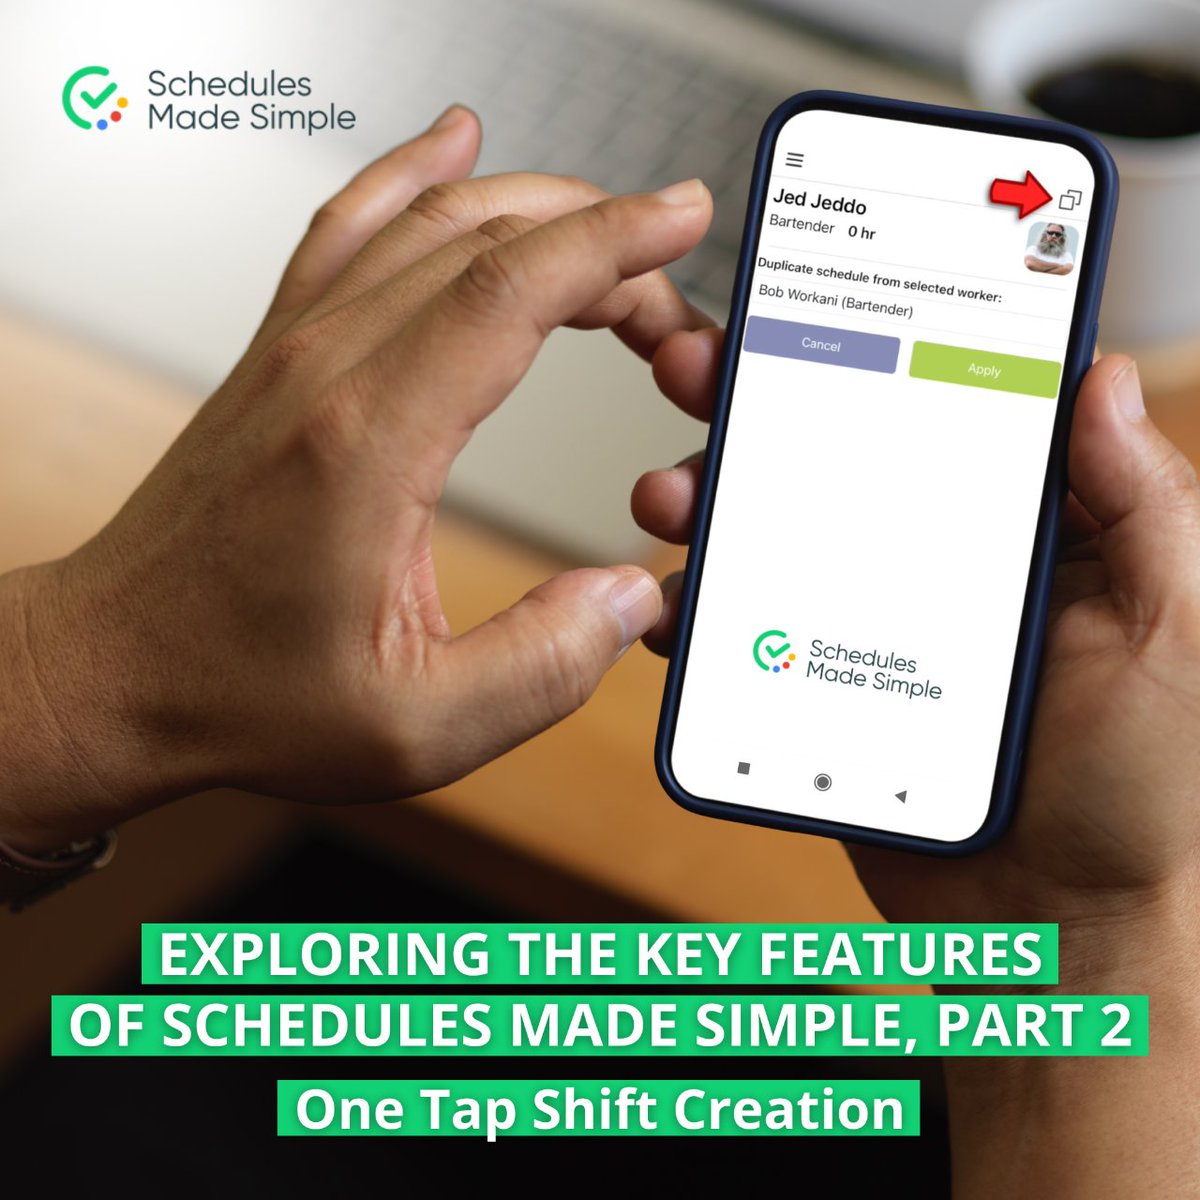 Welcome back to our series spotlighting the game-changing features of Schedules Made Simple! 🌟

Today, we're diving into a feature that's a real time-saver:

[Read more in the thread]

#EfficiencyBoost #ProductivityHacks #RestaurantTechnology #WorkforceManagement #RestaurantLife